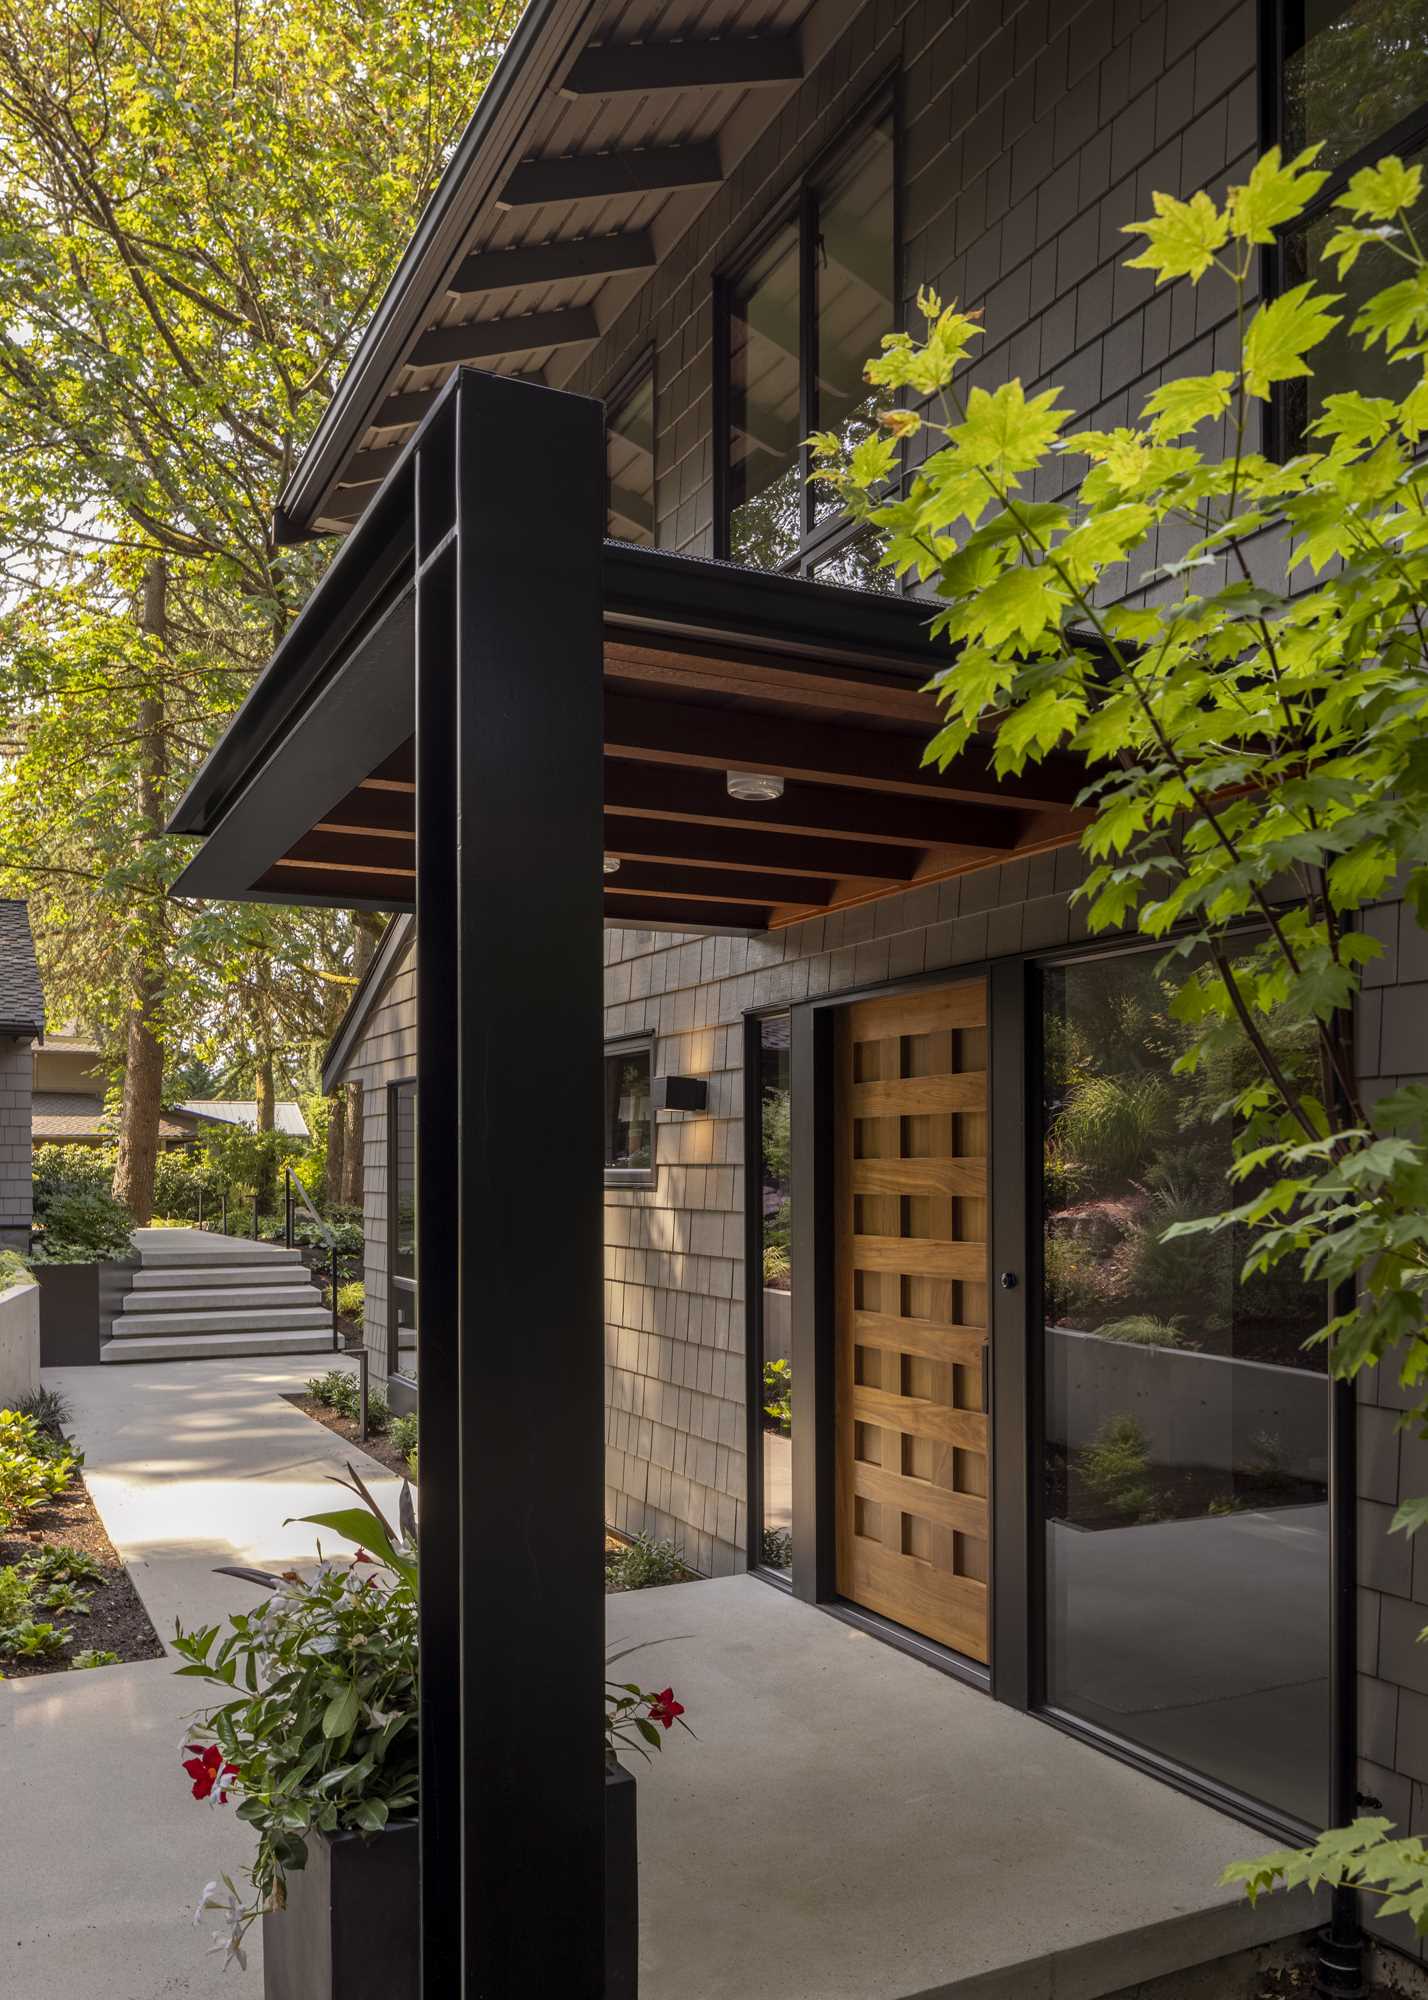 A steel and wood canopy provides lighting and protection from the rain, while thoughtfully placed landscaping areas buffer the home and offer privacy to the spaces inside.